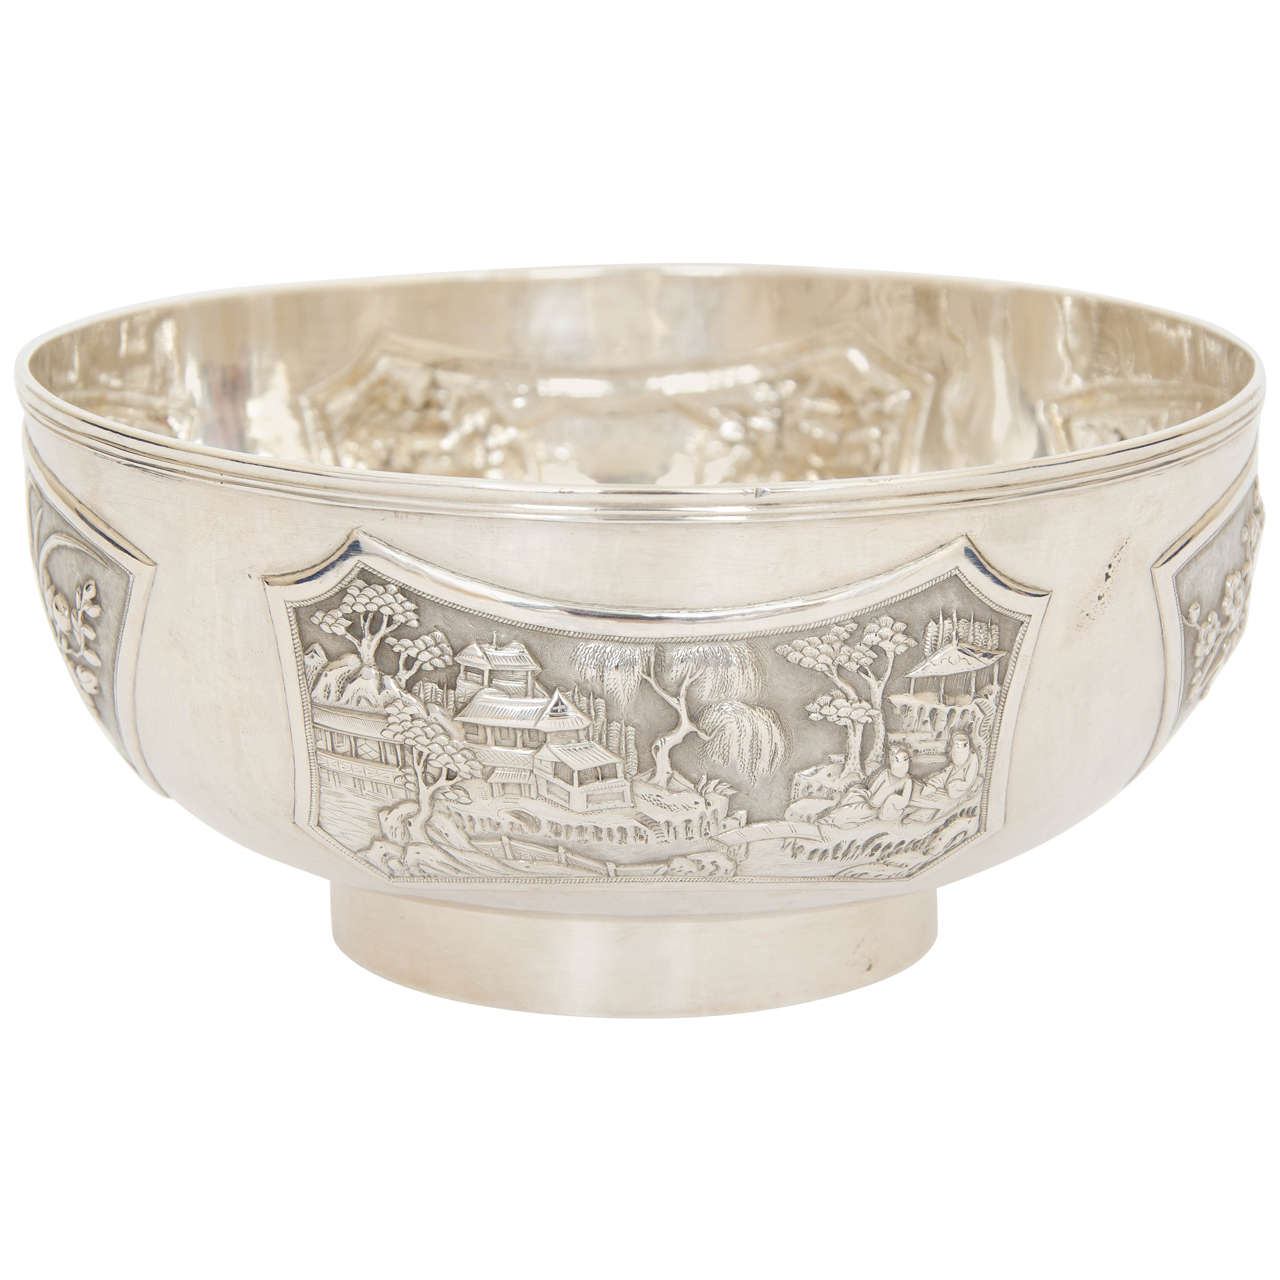 Chinese Export Silver Bowl with Floral and Figural Decoration